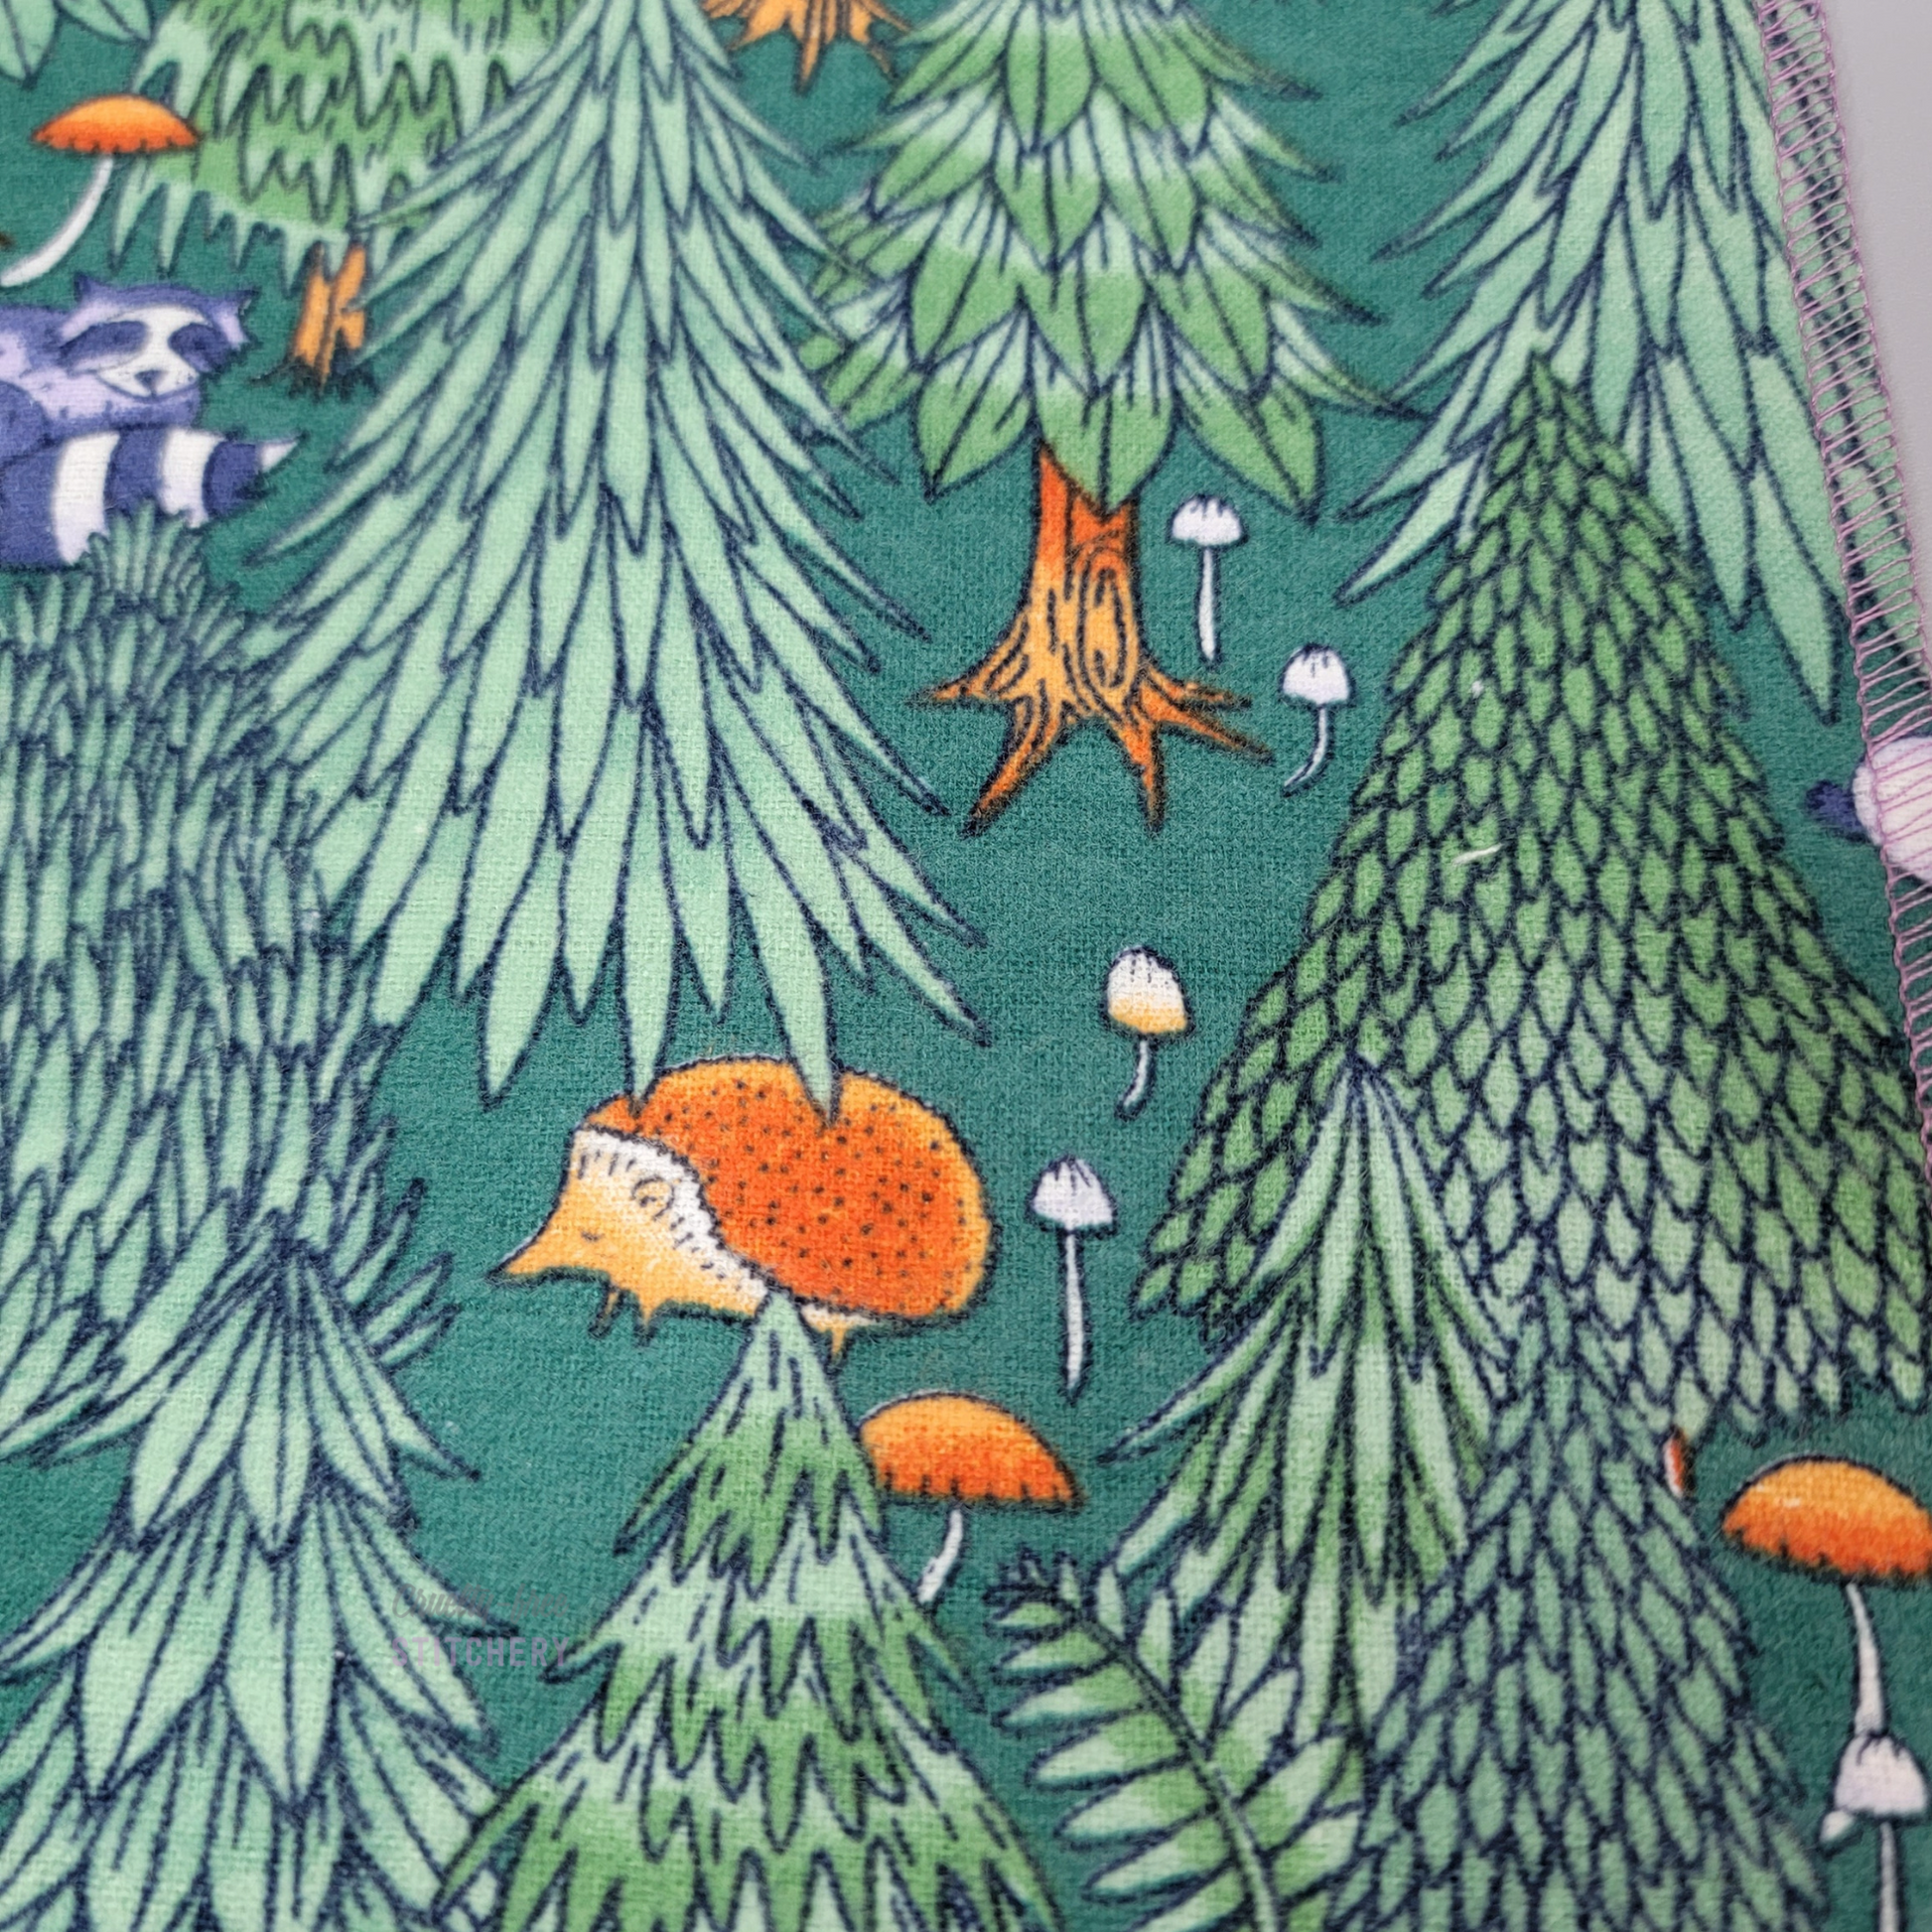 Close-up of the print, showing a raccoon and hedgehog.